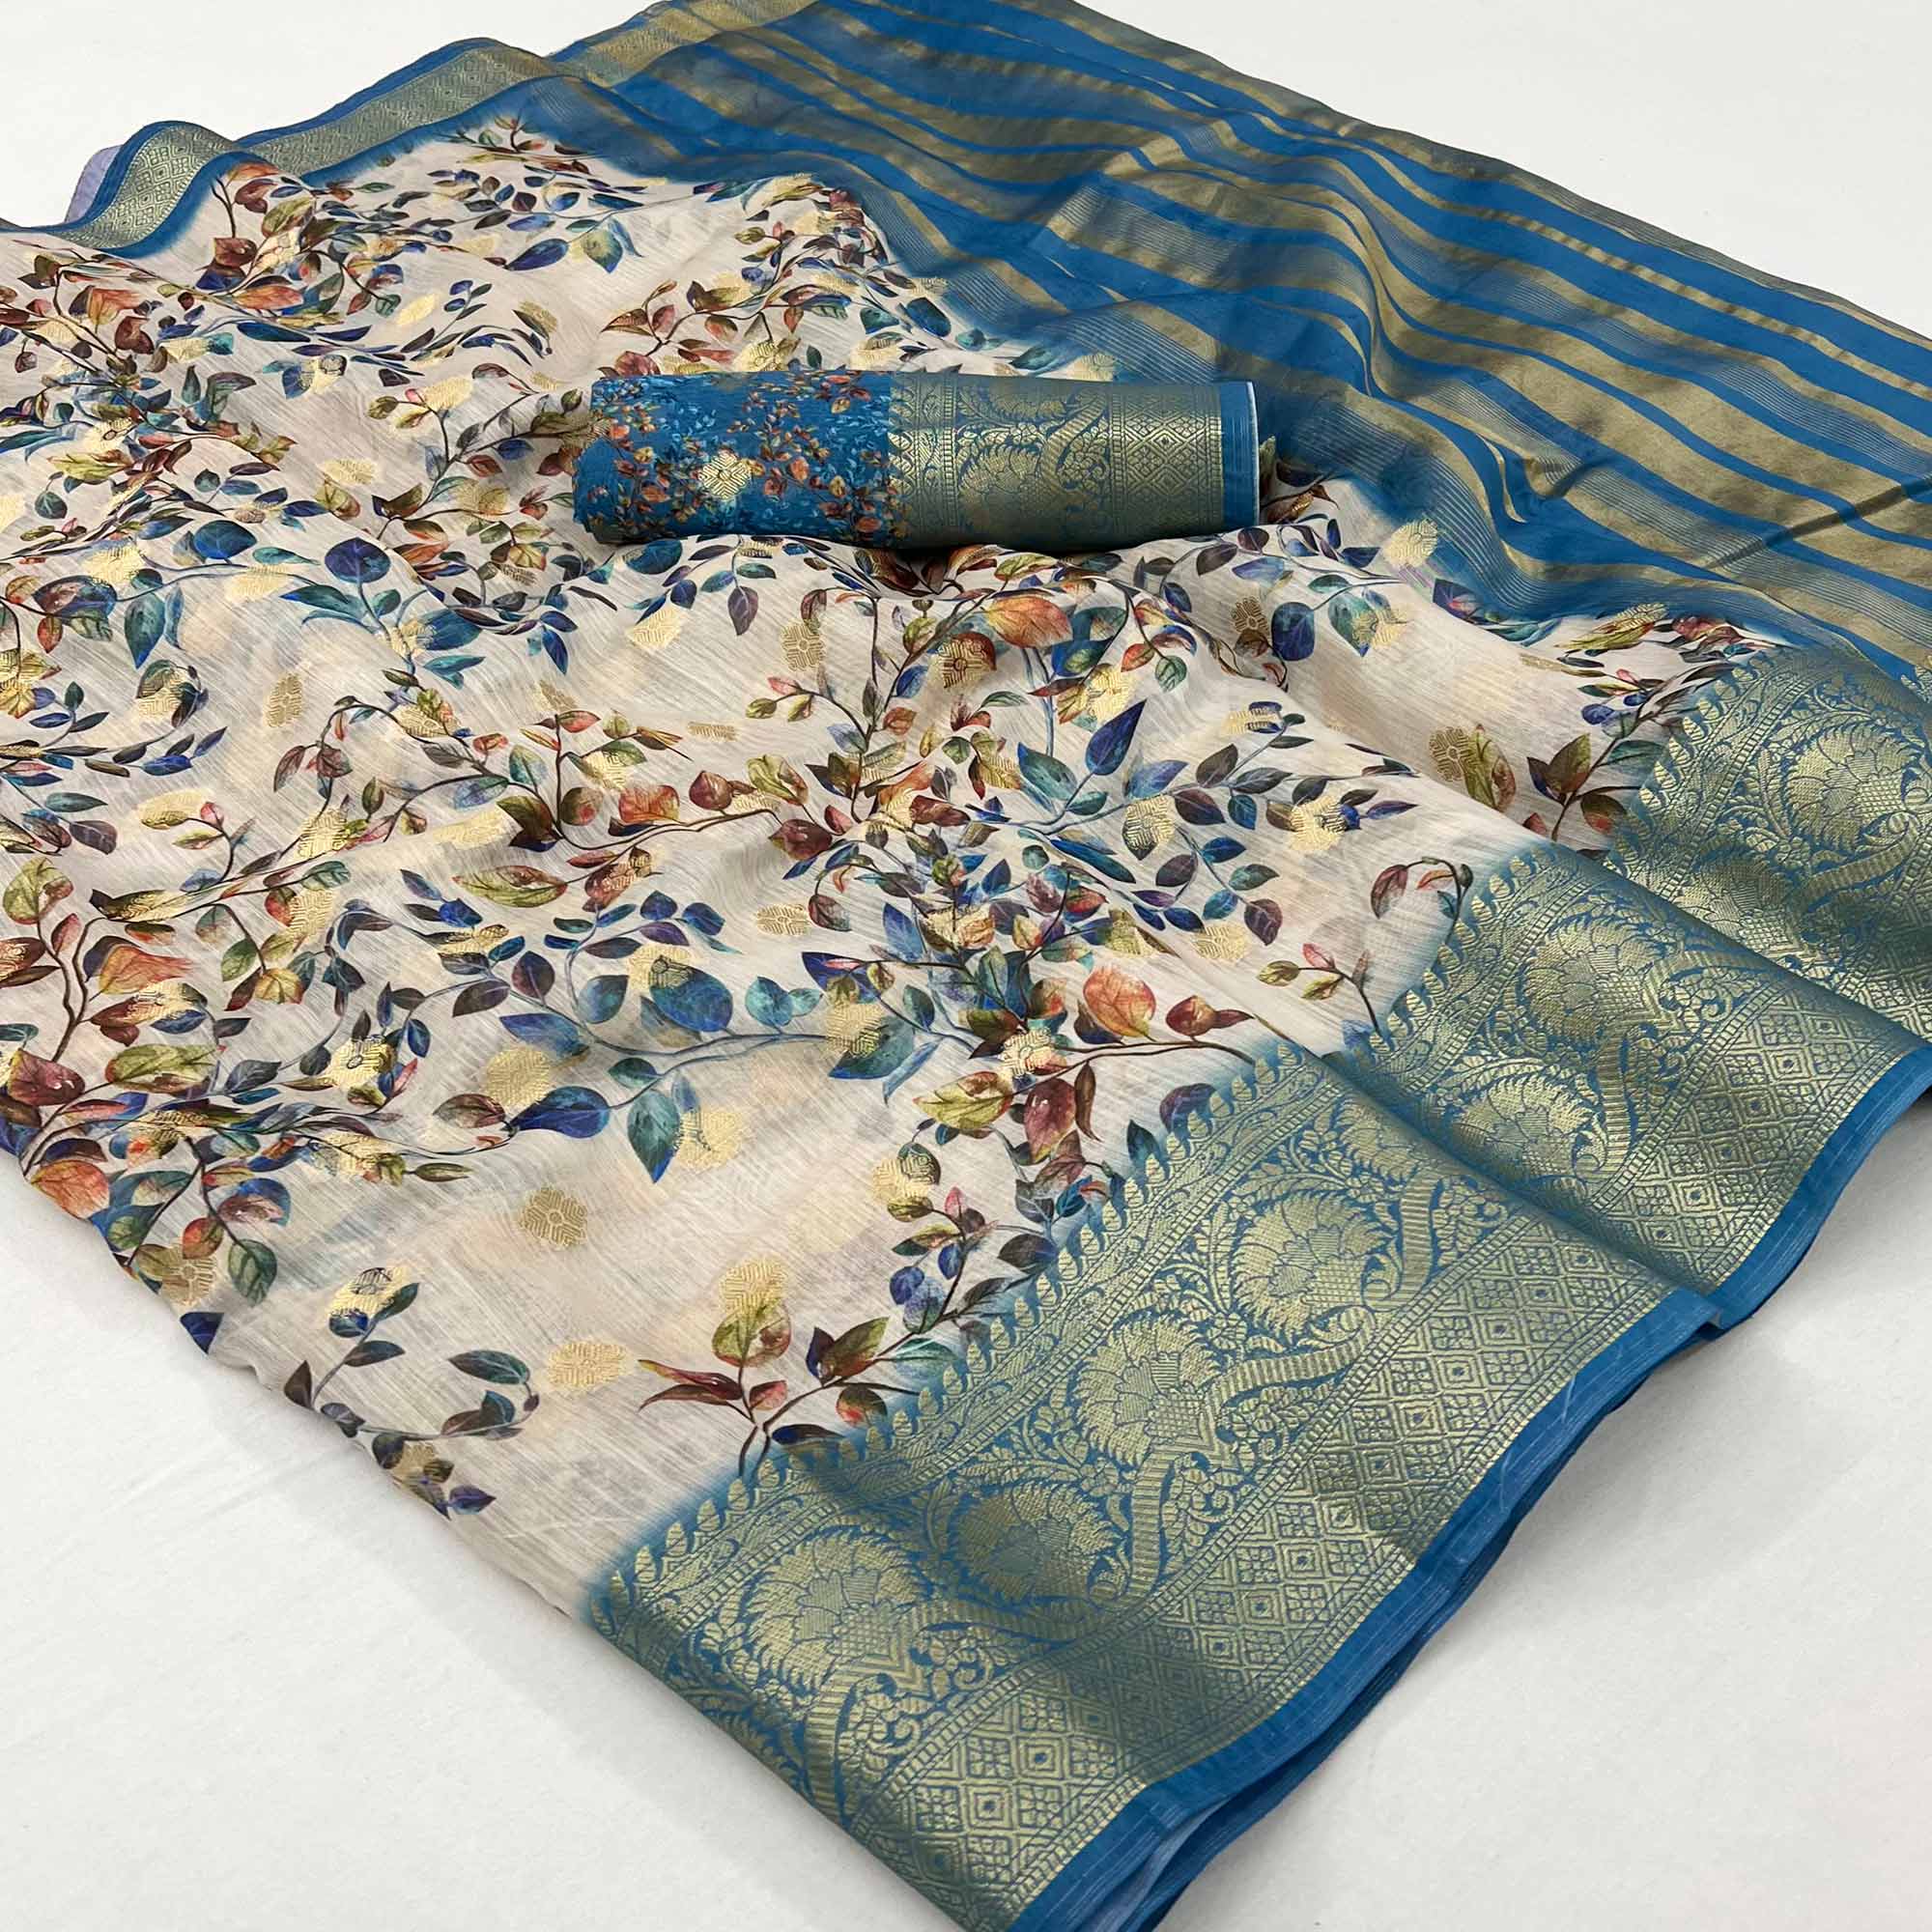 Off White Floral Digital Printed With Woven Border Cotton Silk Saree